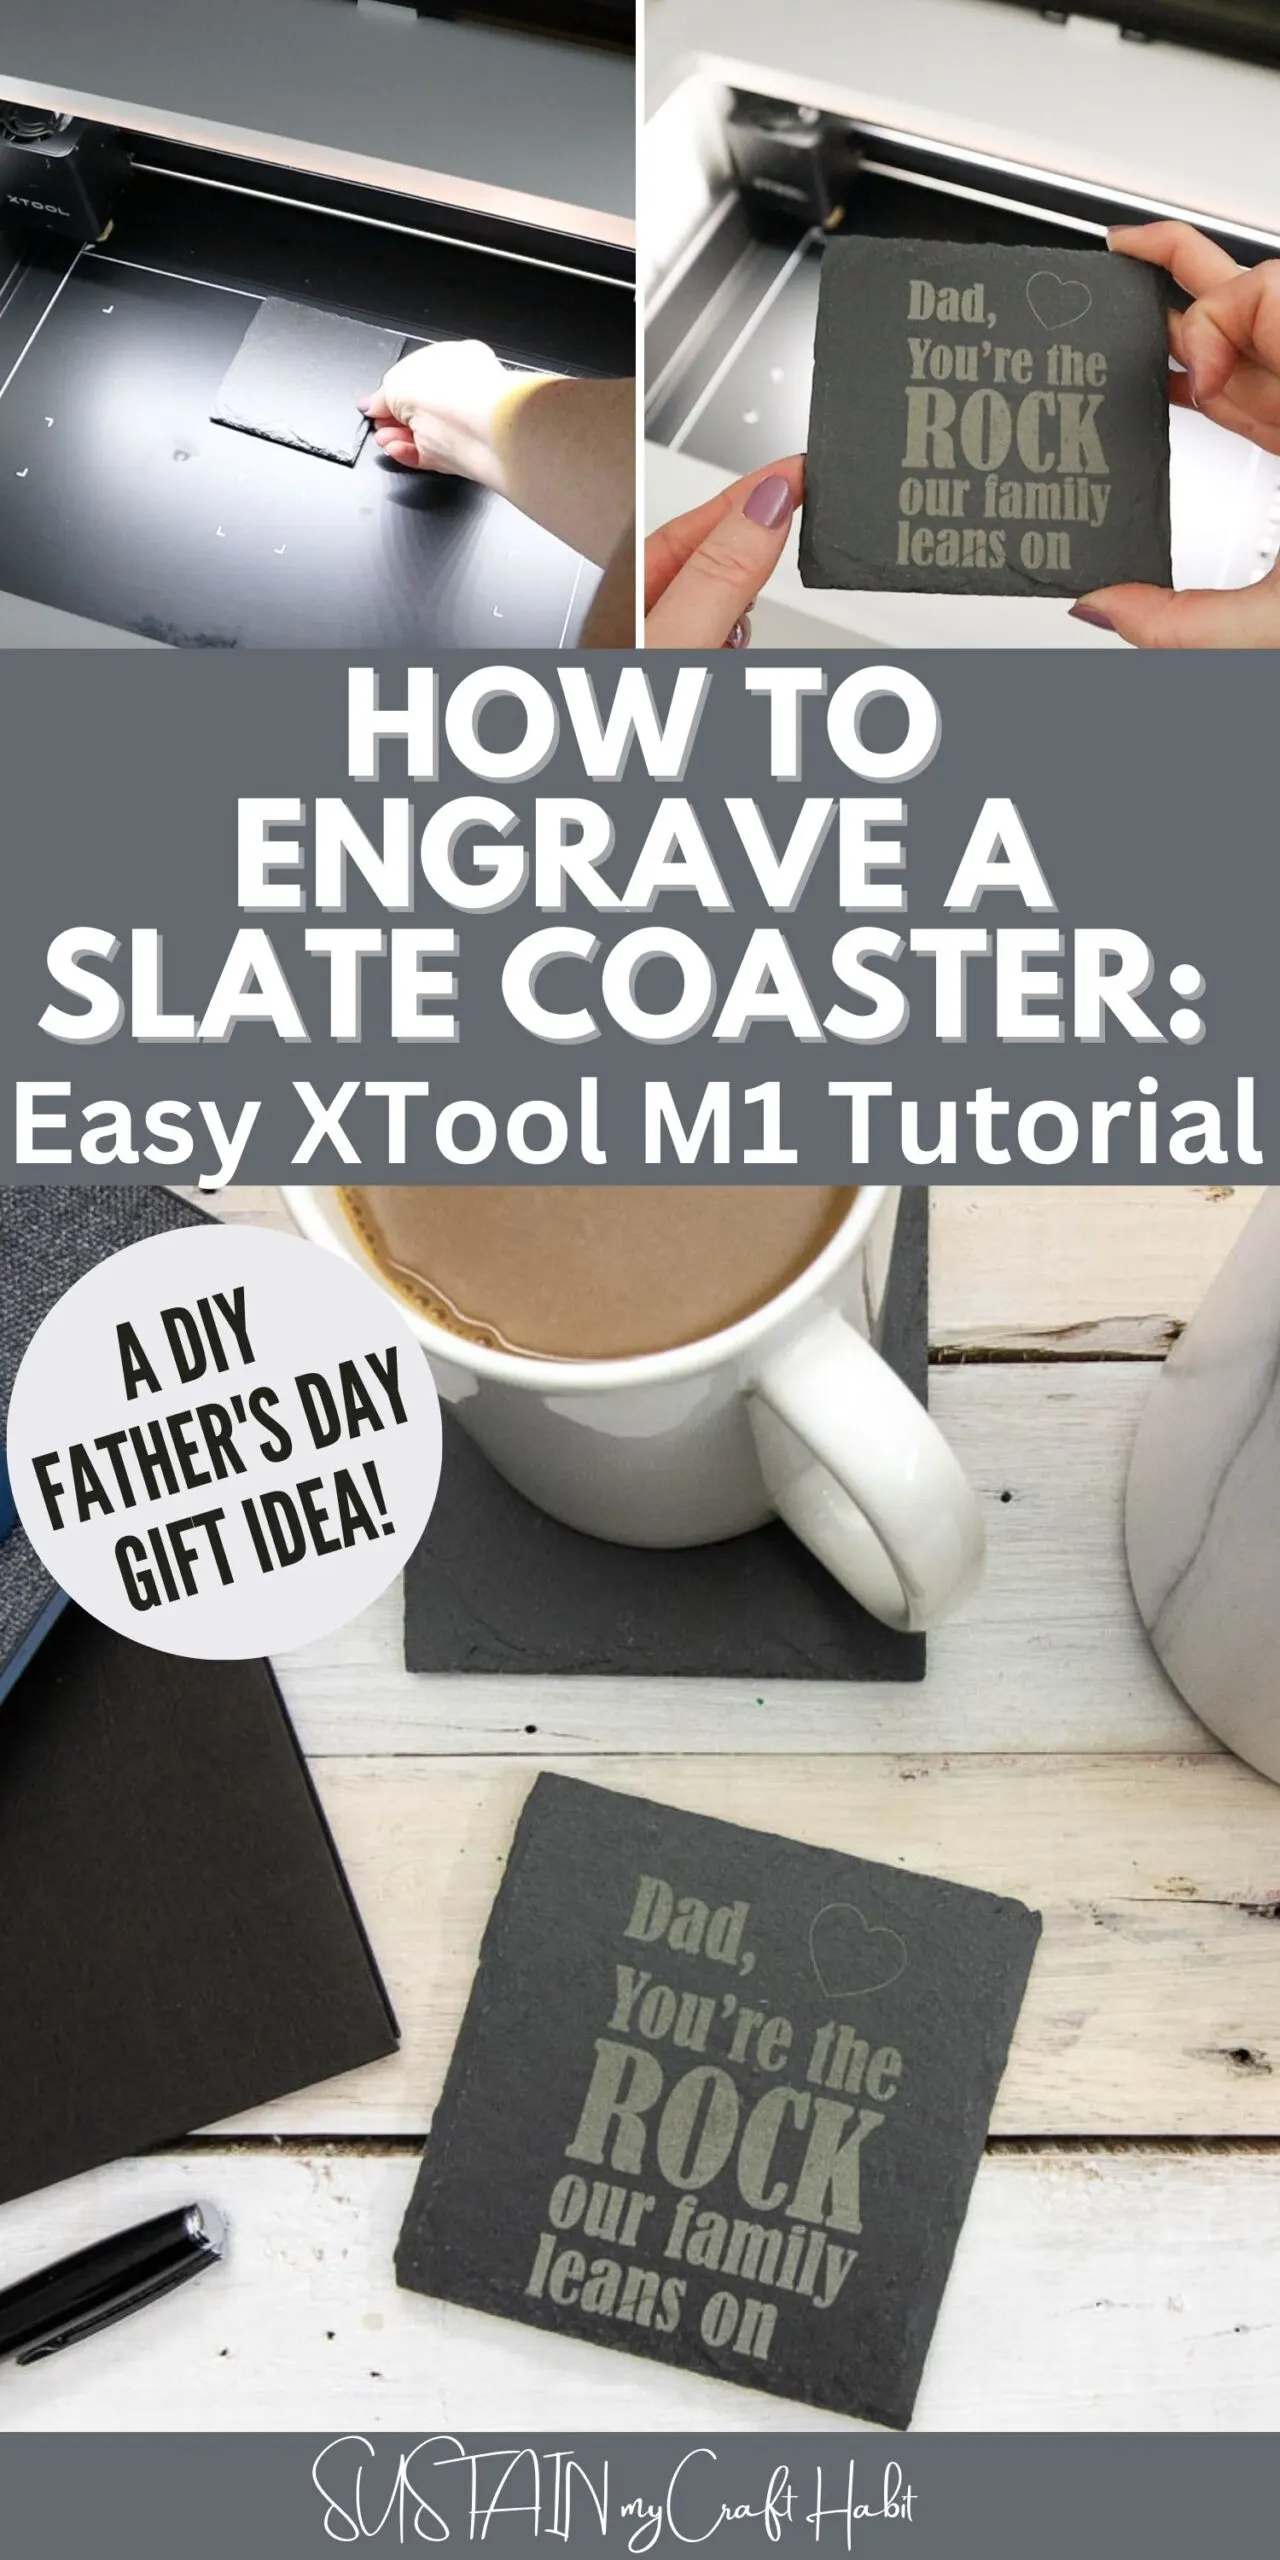 Collage of images with text overlay reading "How to Engrave a Slate Coaster: Easy XTool M1 Tutorial". 